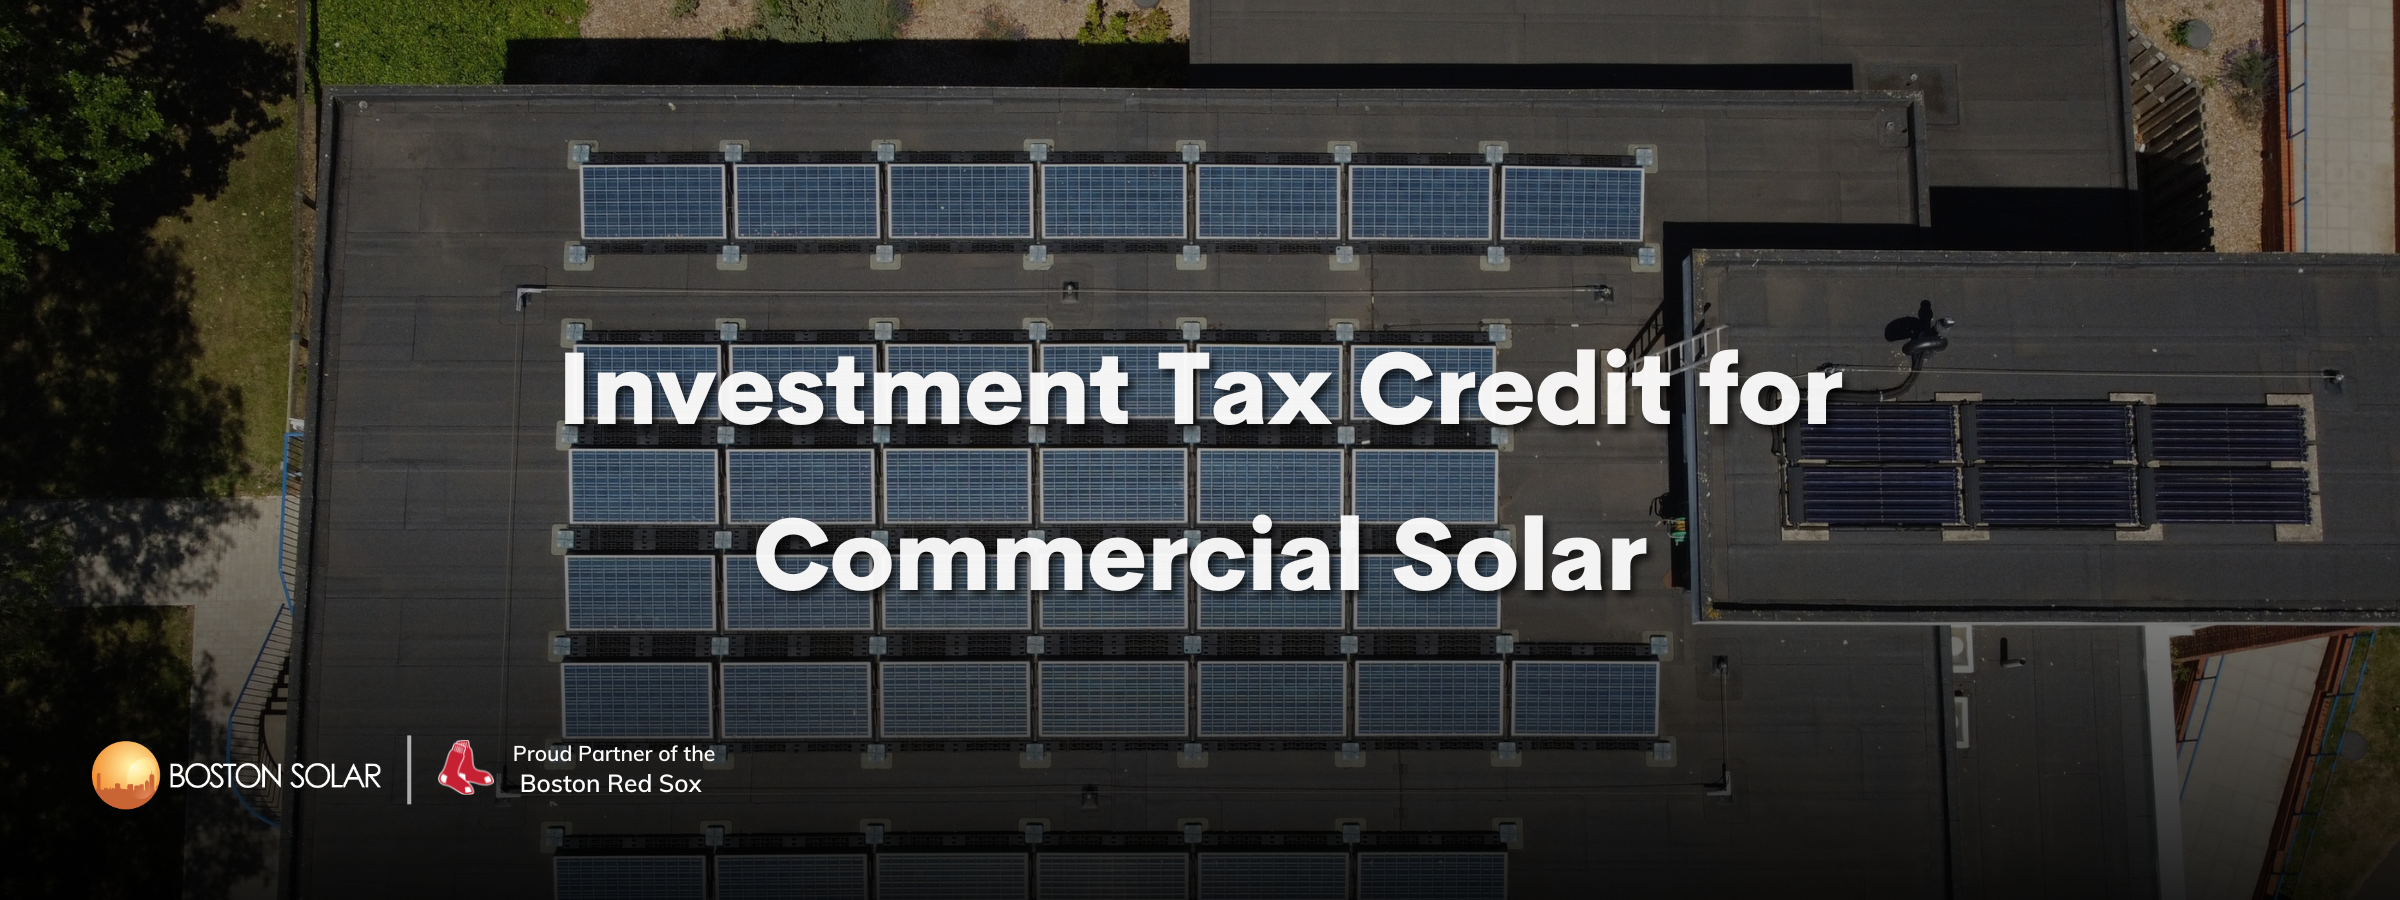 The Investment Tax Credit (ITC)